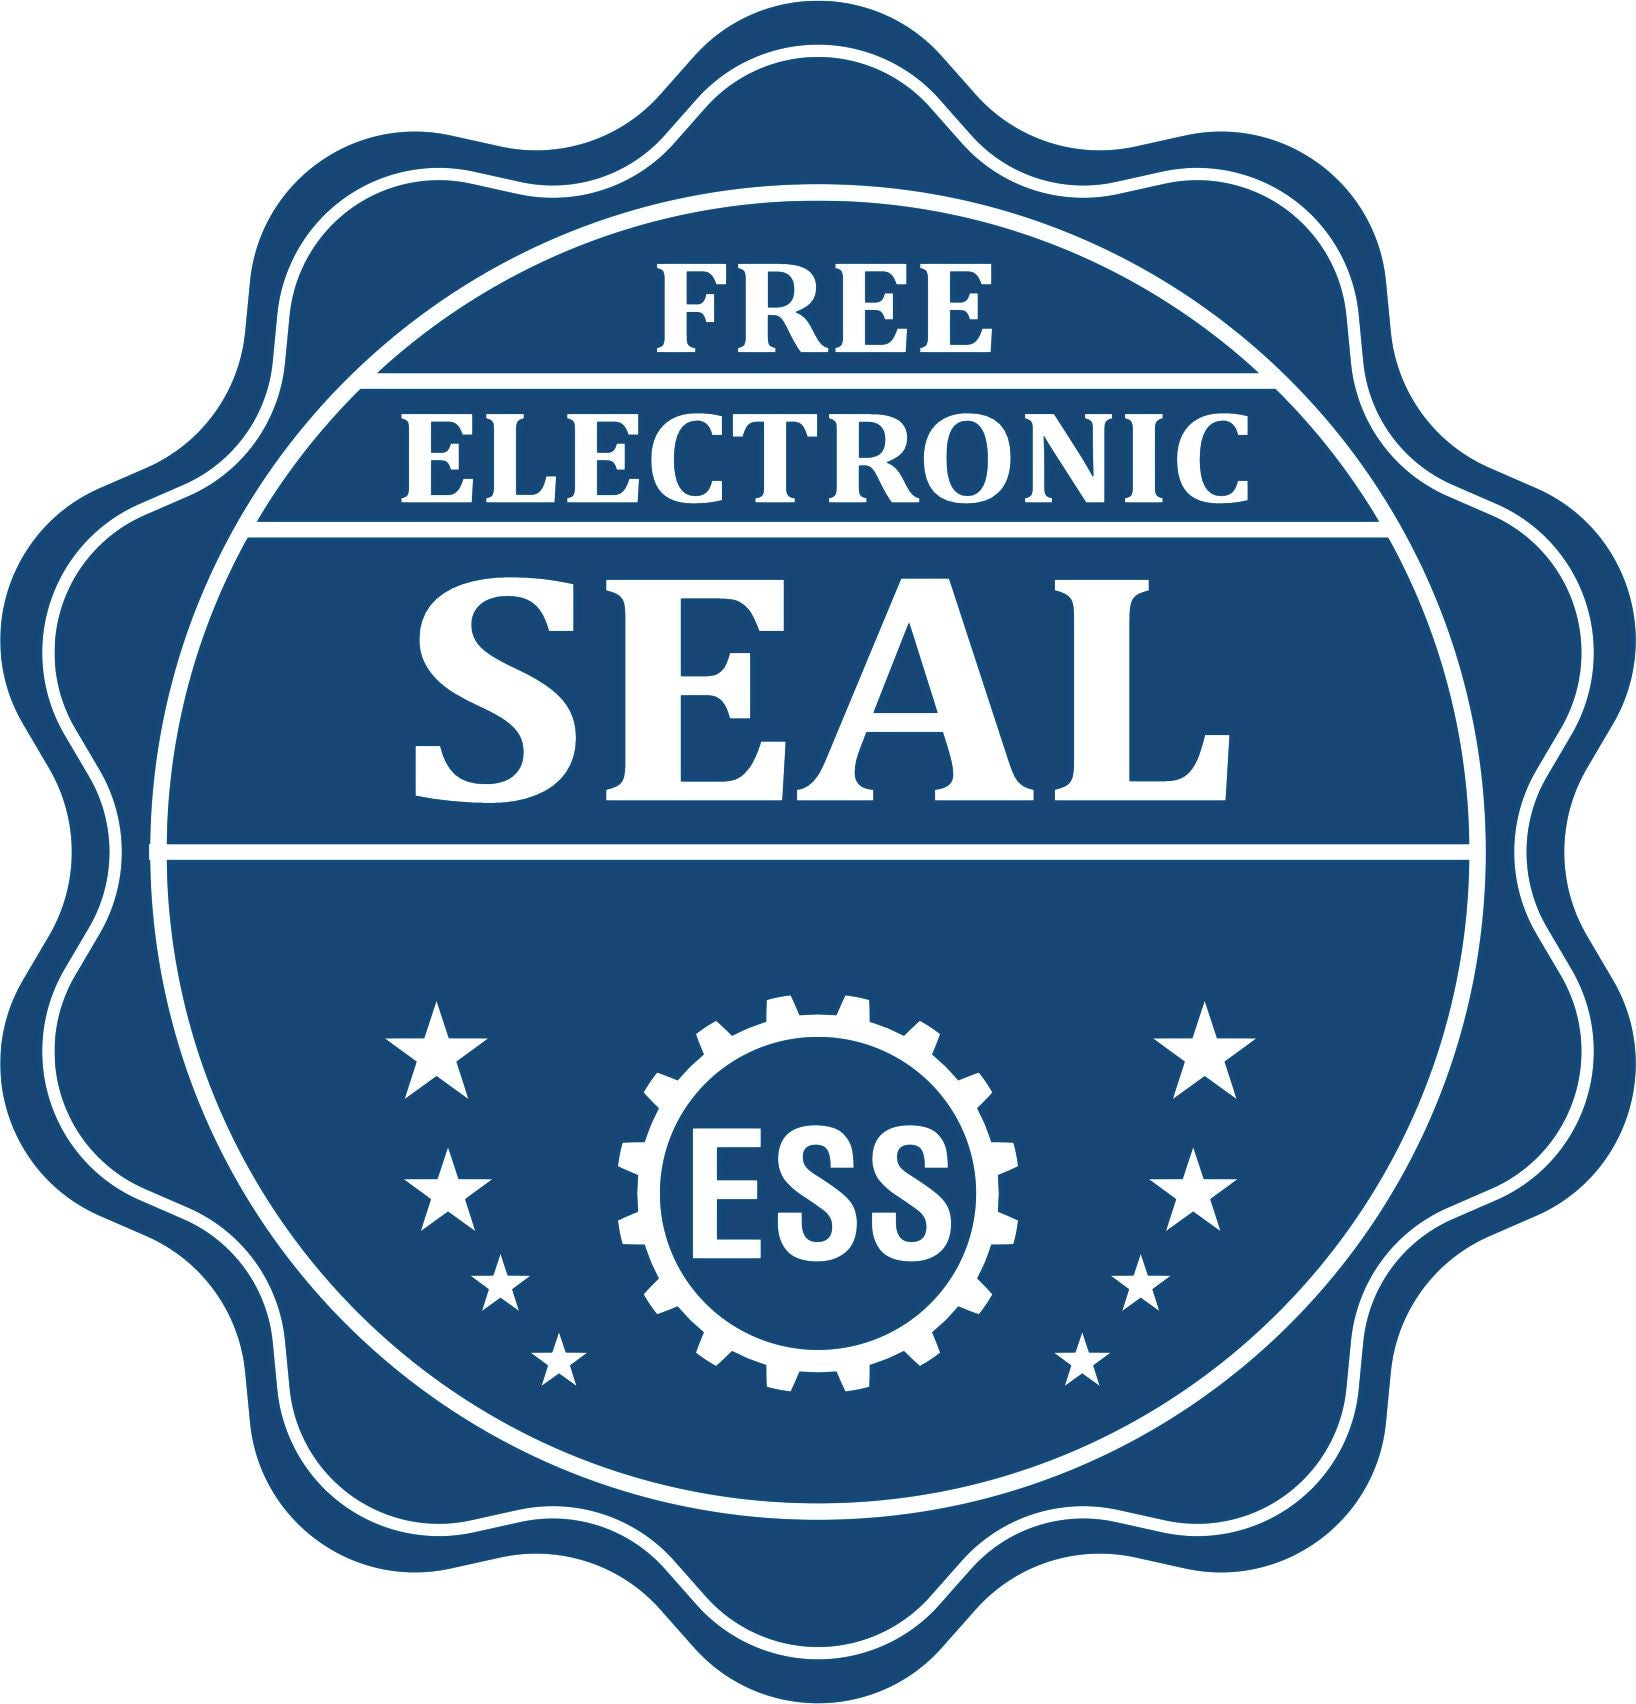 A badge showing a free electronic seal for the Gift Nevada Land Surveyor Seal with stars and the ESS gear on the emblem.